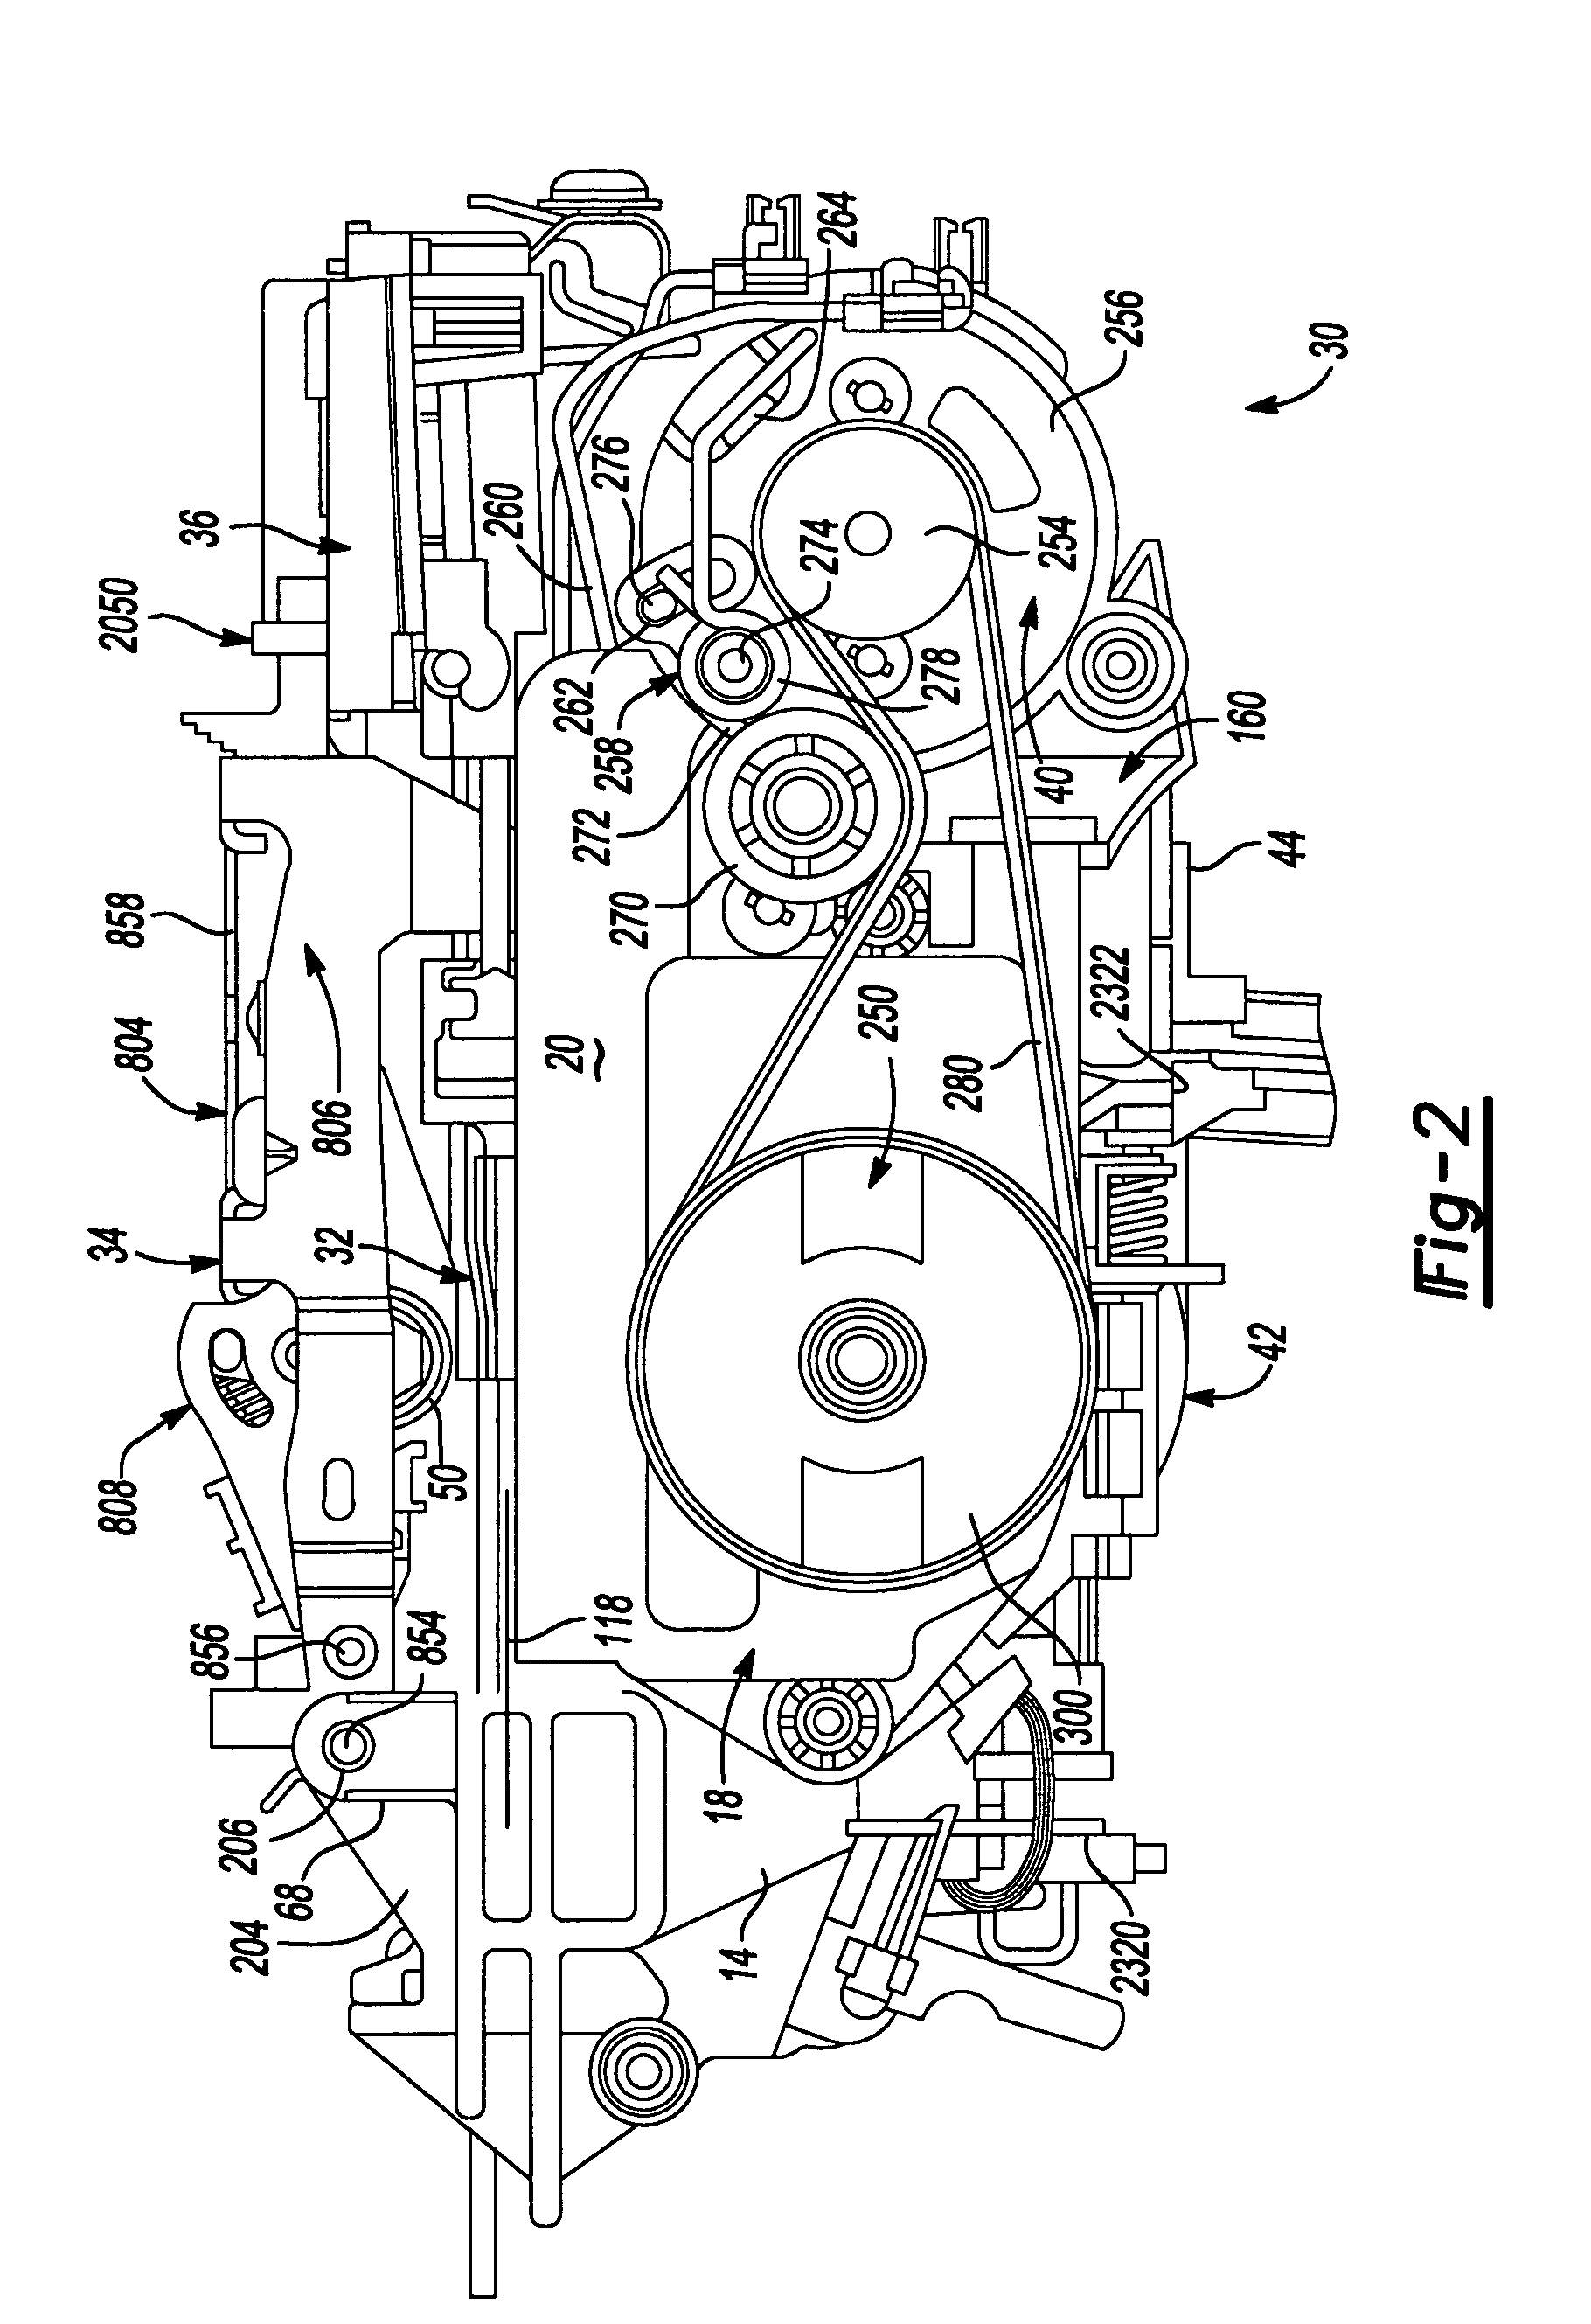 Activation arm configuration for a power tool